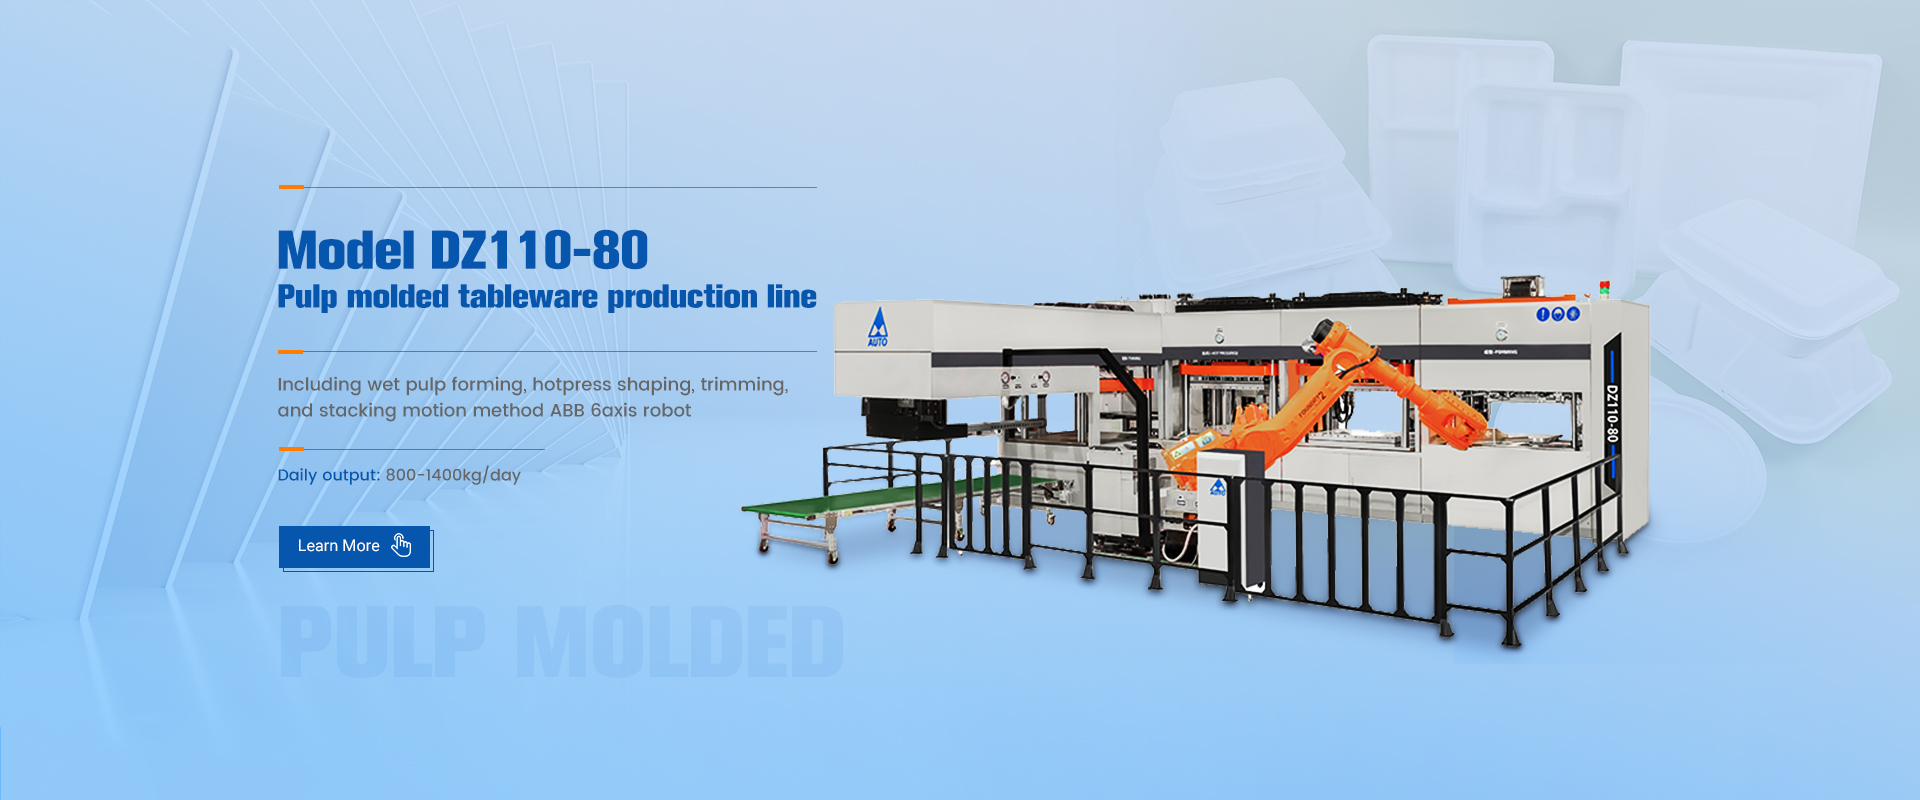 Model DZ110-80 pulp molded table ware production line